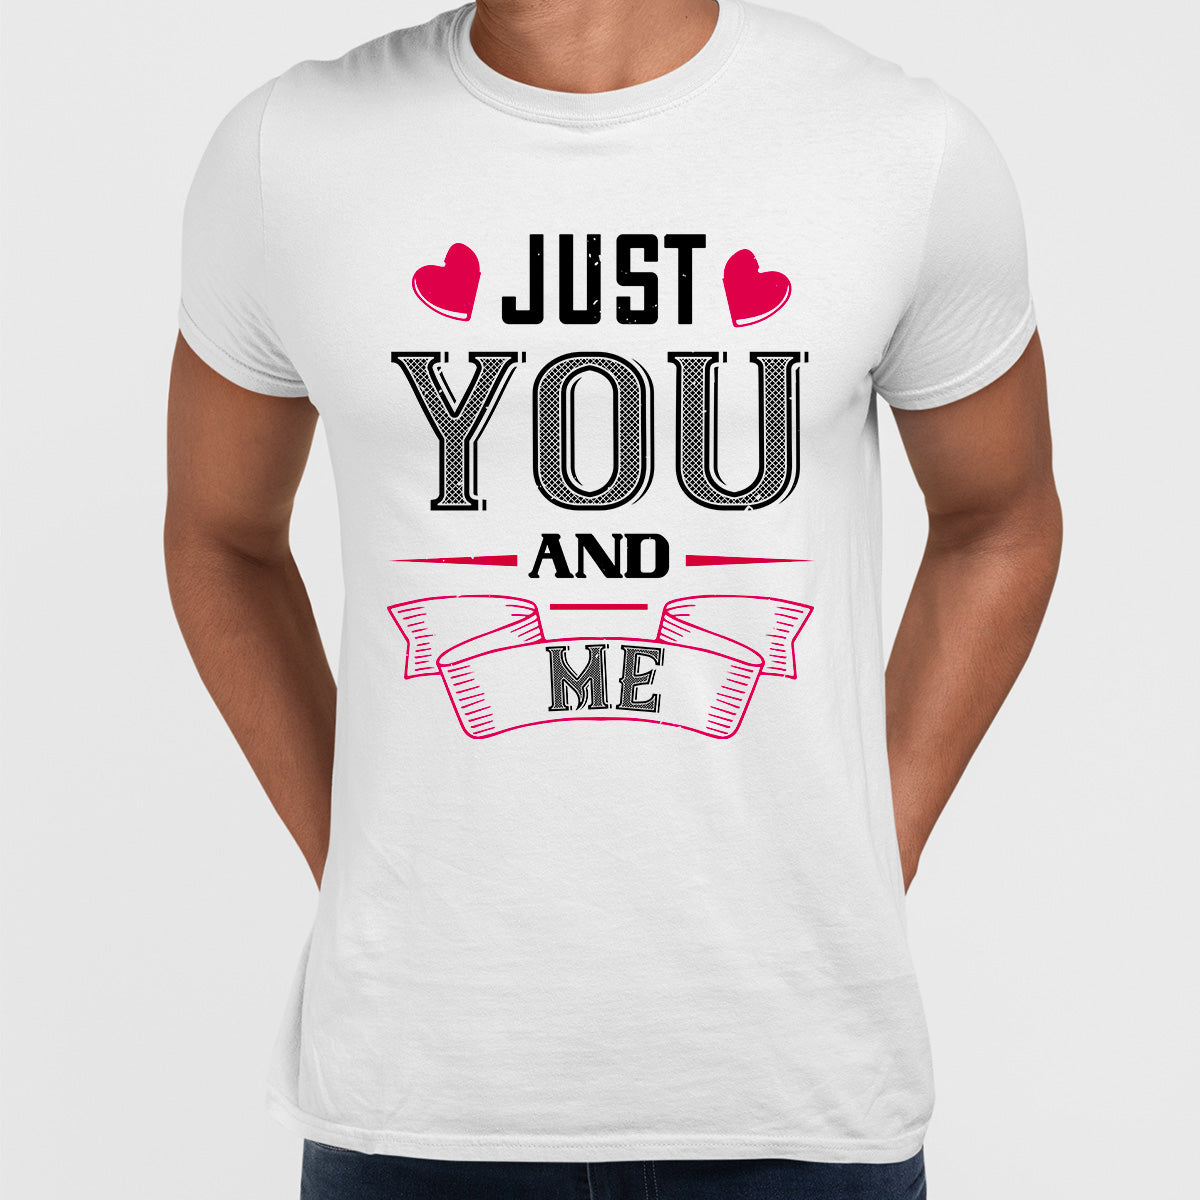 Just you and me - valentine's day Unisex T-shirt edition - Kuzi Tees